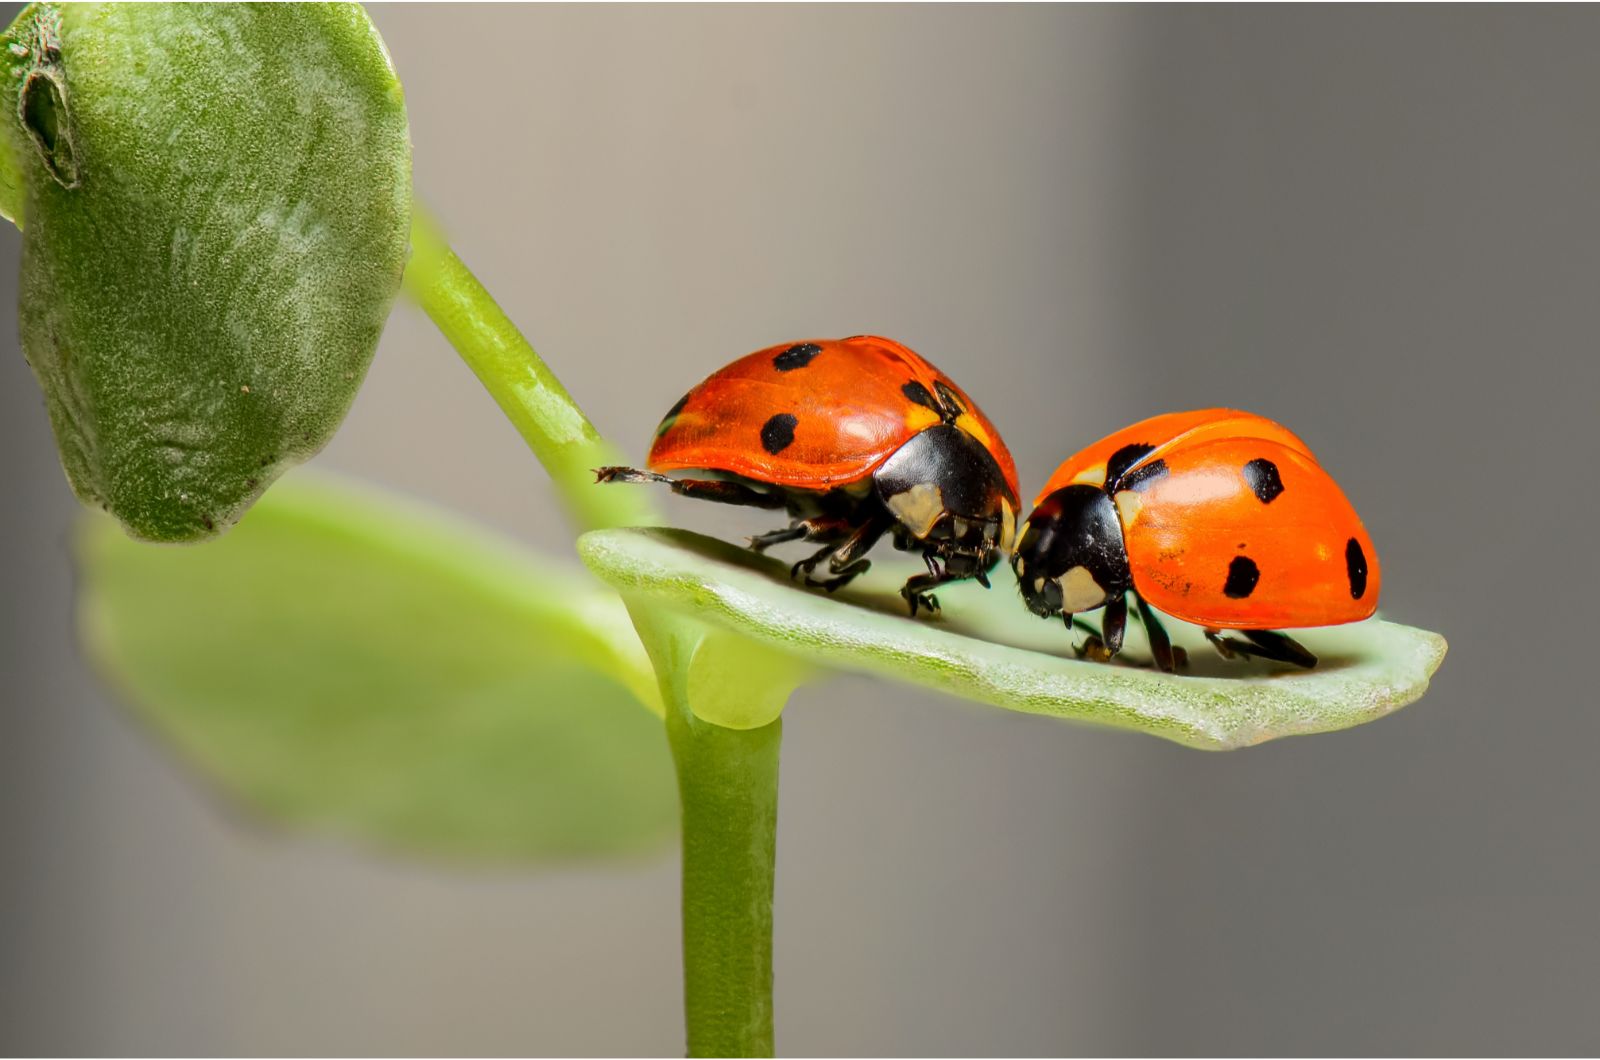 Could Ladybugs Save The World?